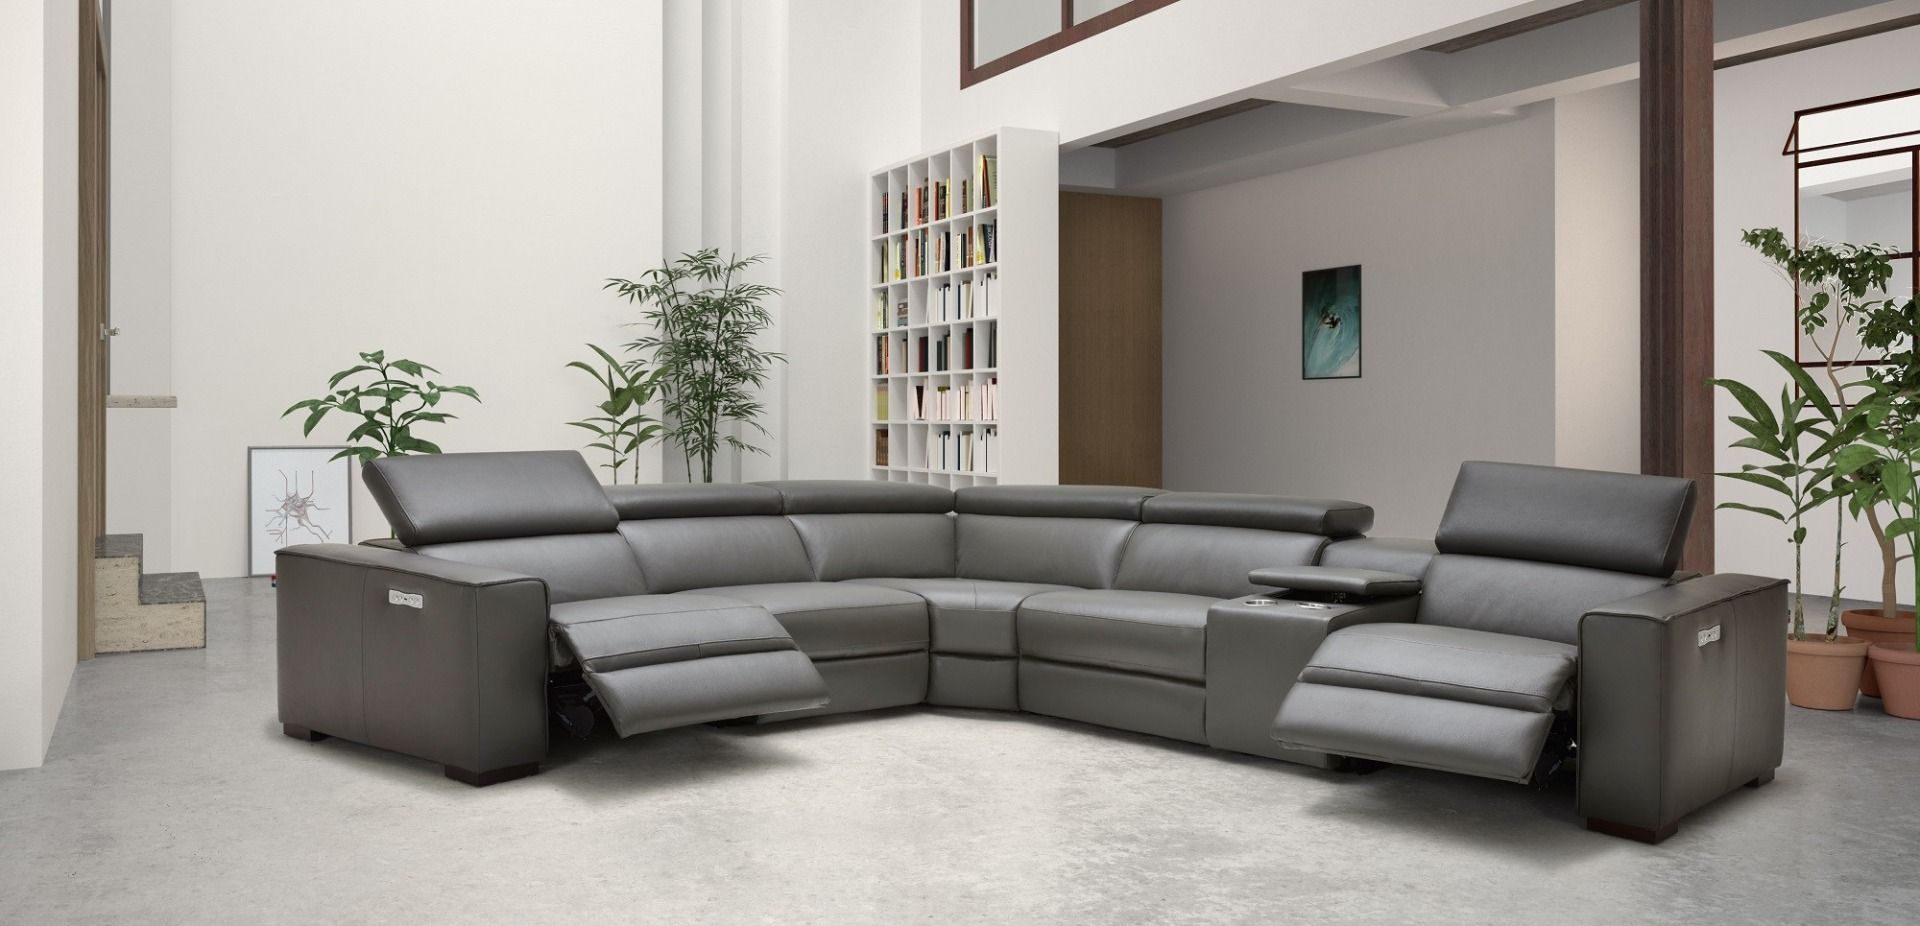 Picasso Sectional Sofa Set In Top Grain Dark Gray Leather With Motion Recliners